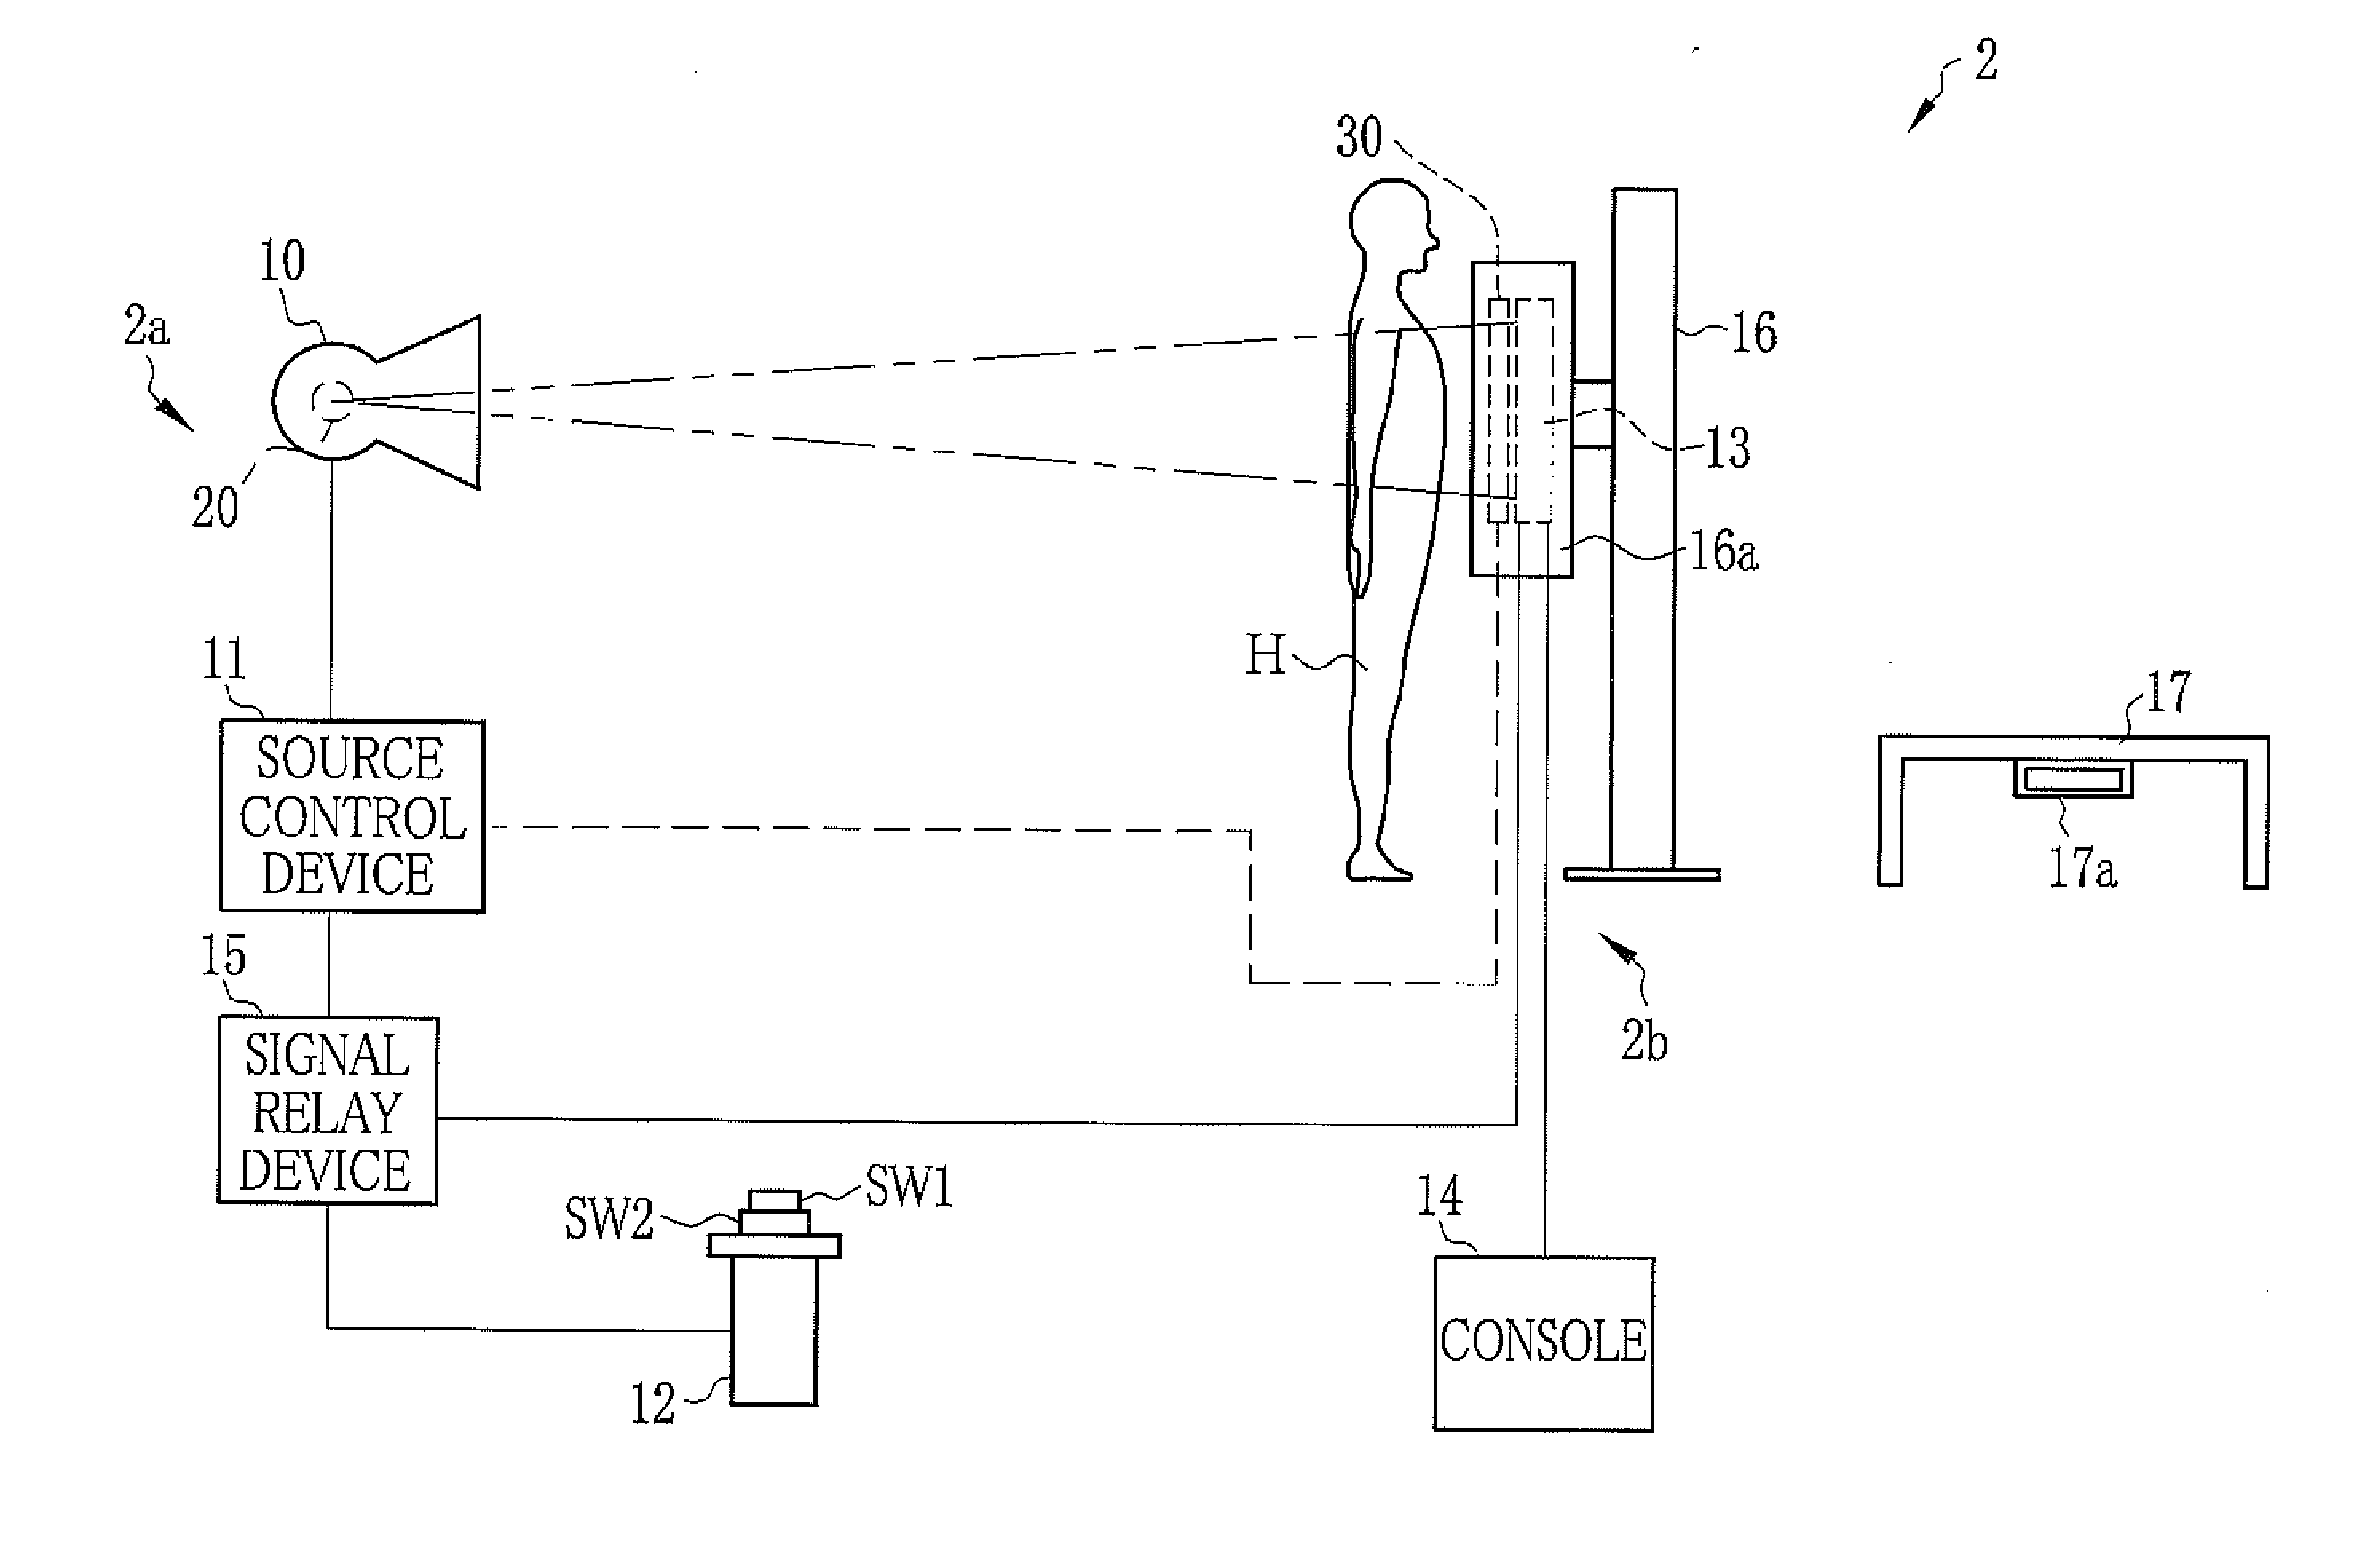 Electronic radiography system and signal relay device